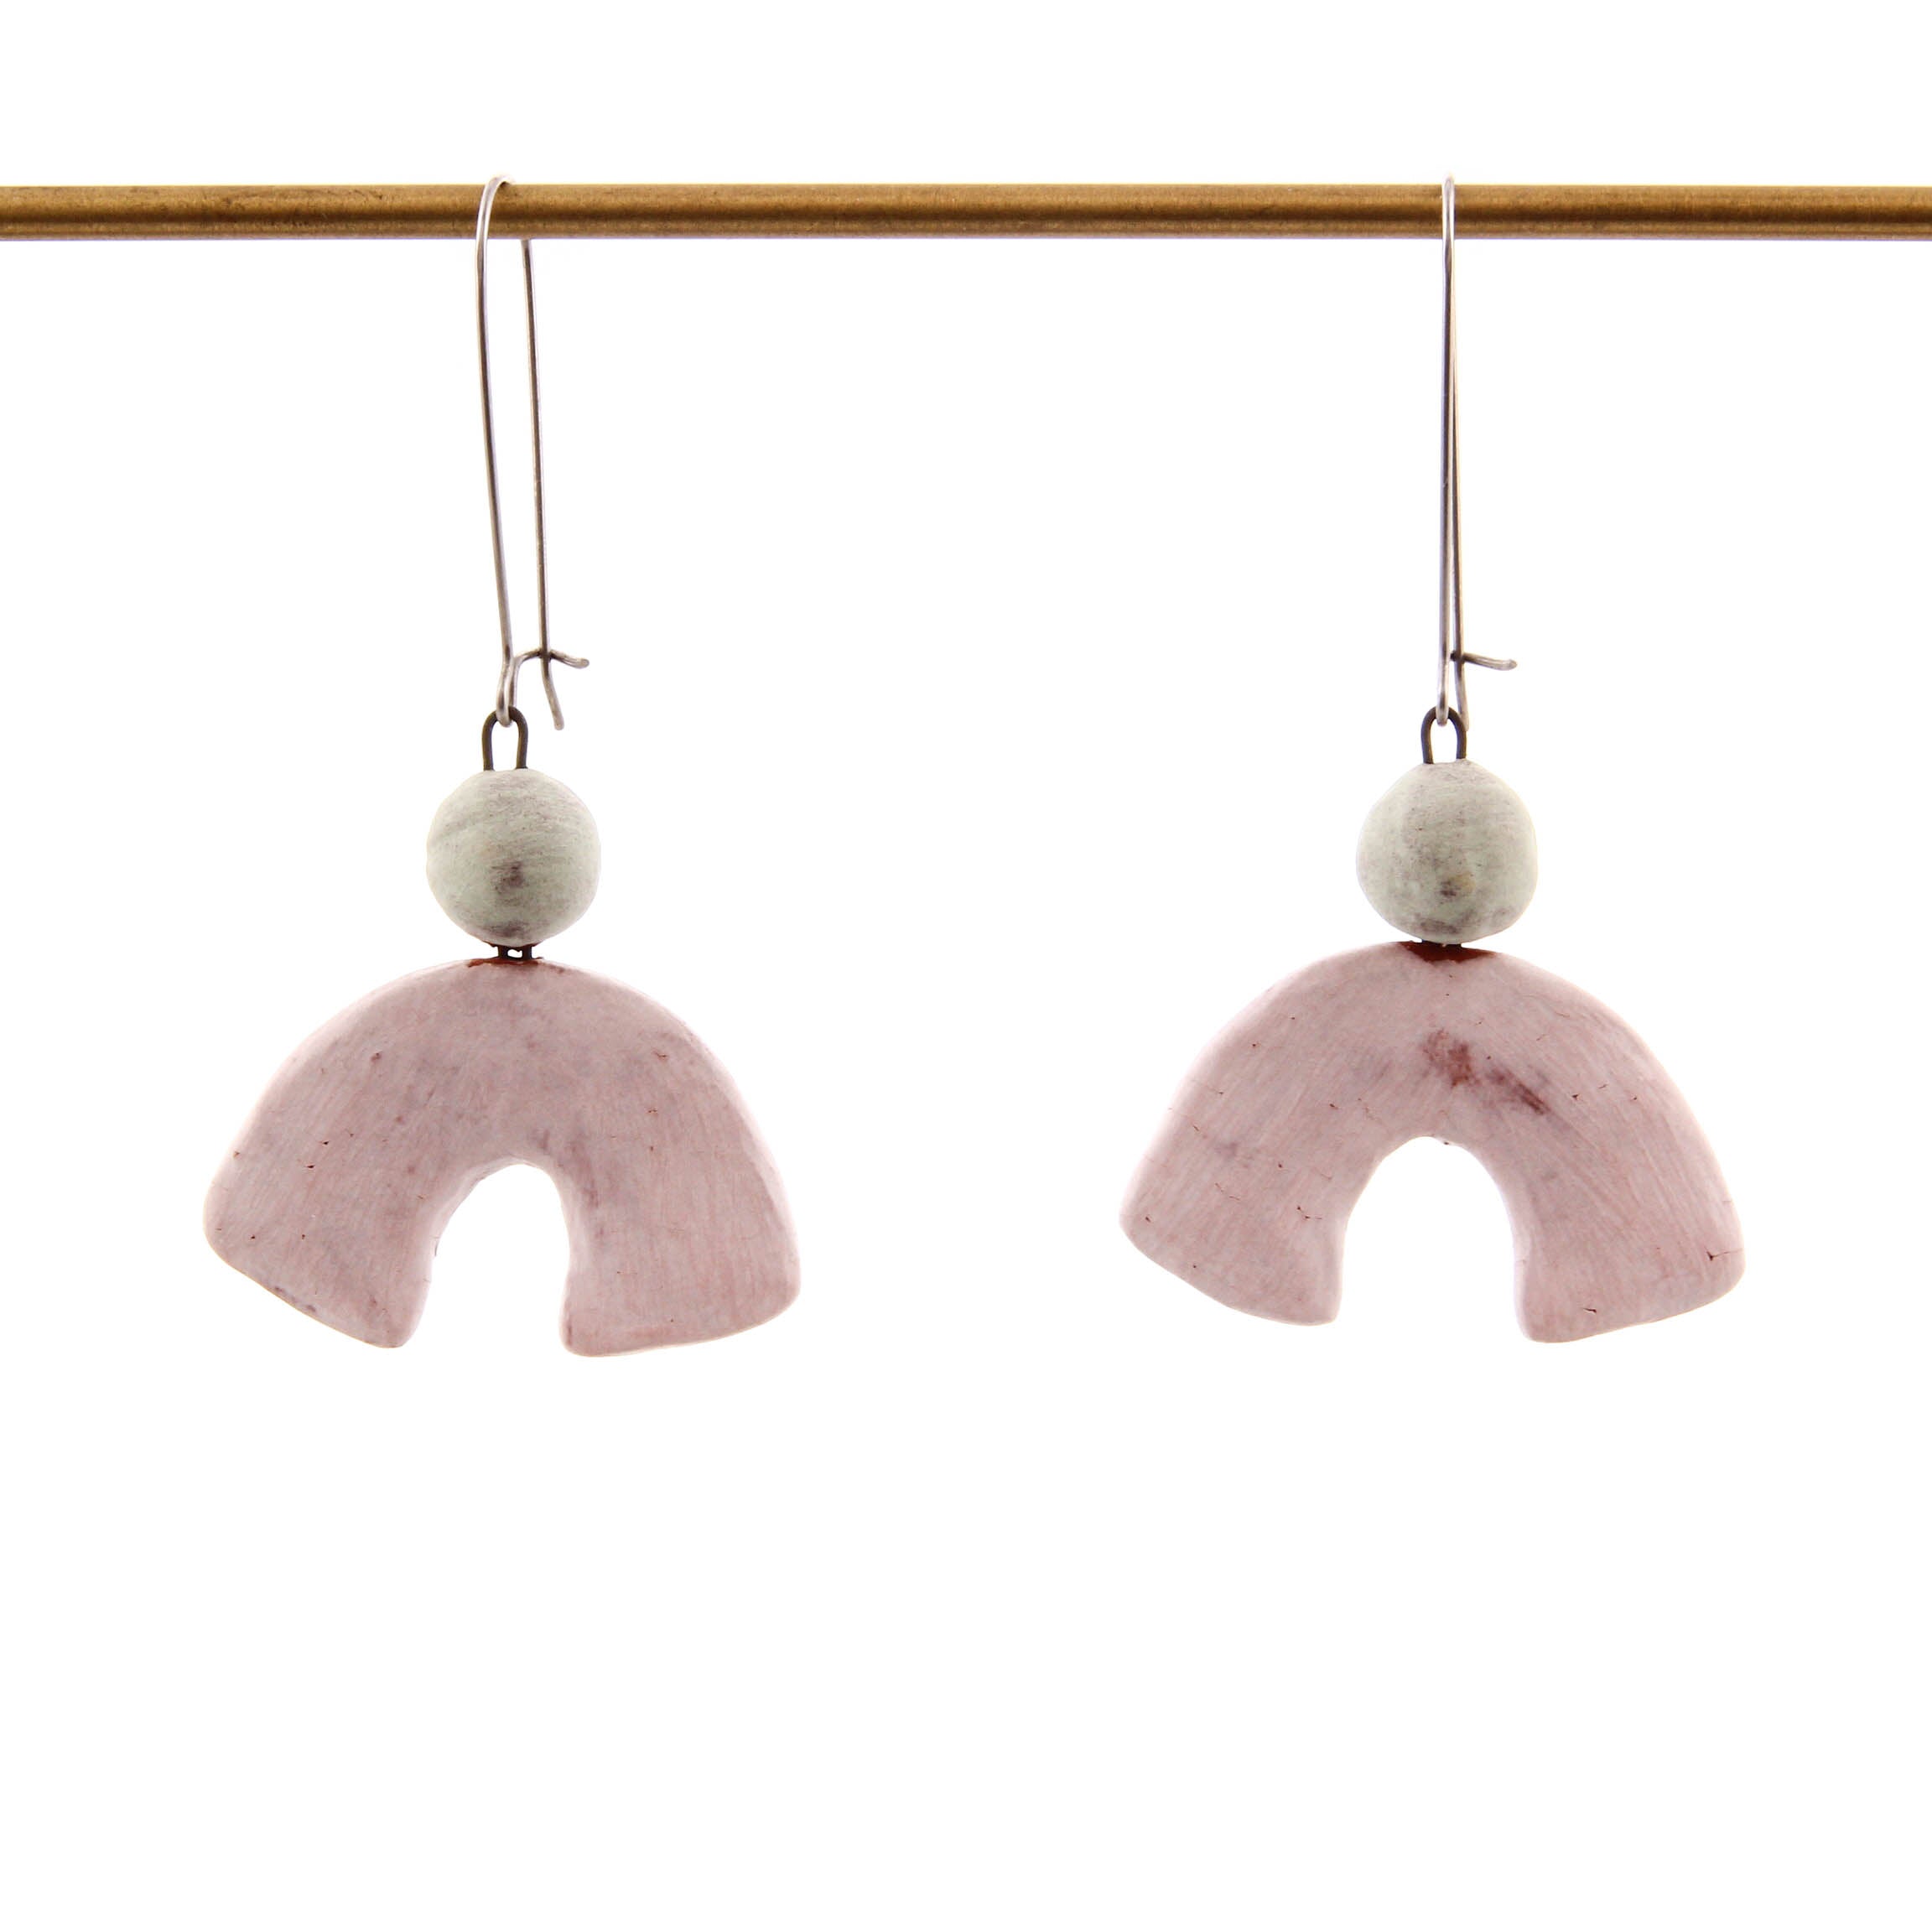 Tara Underwood, Arches Earrings in Pink and White